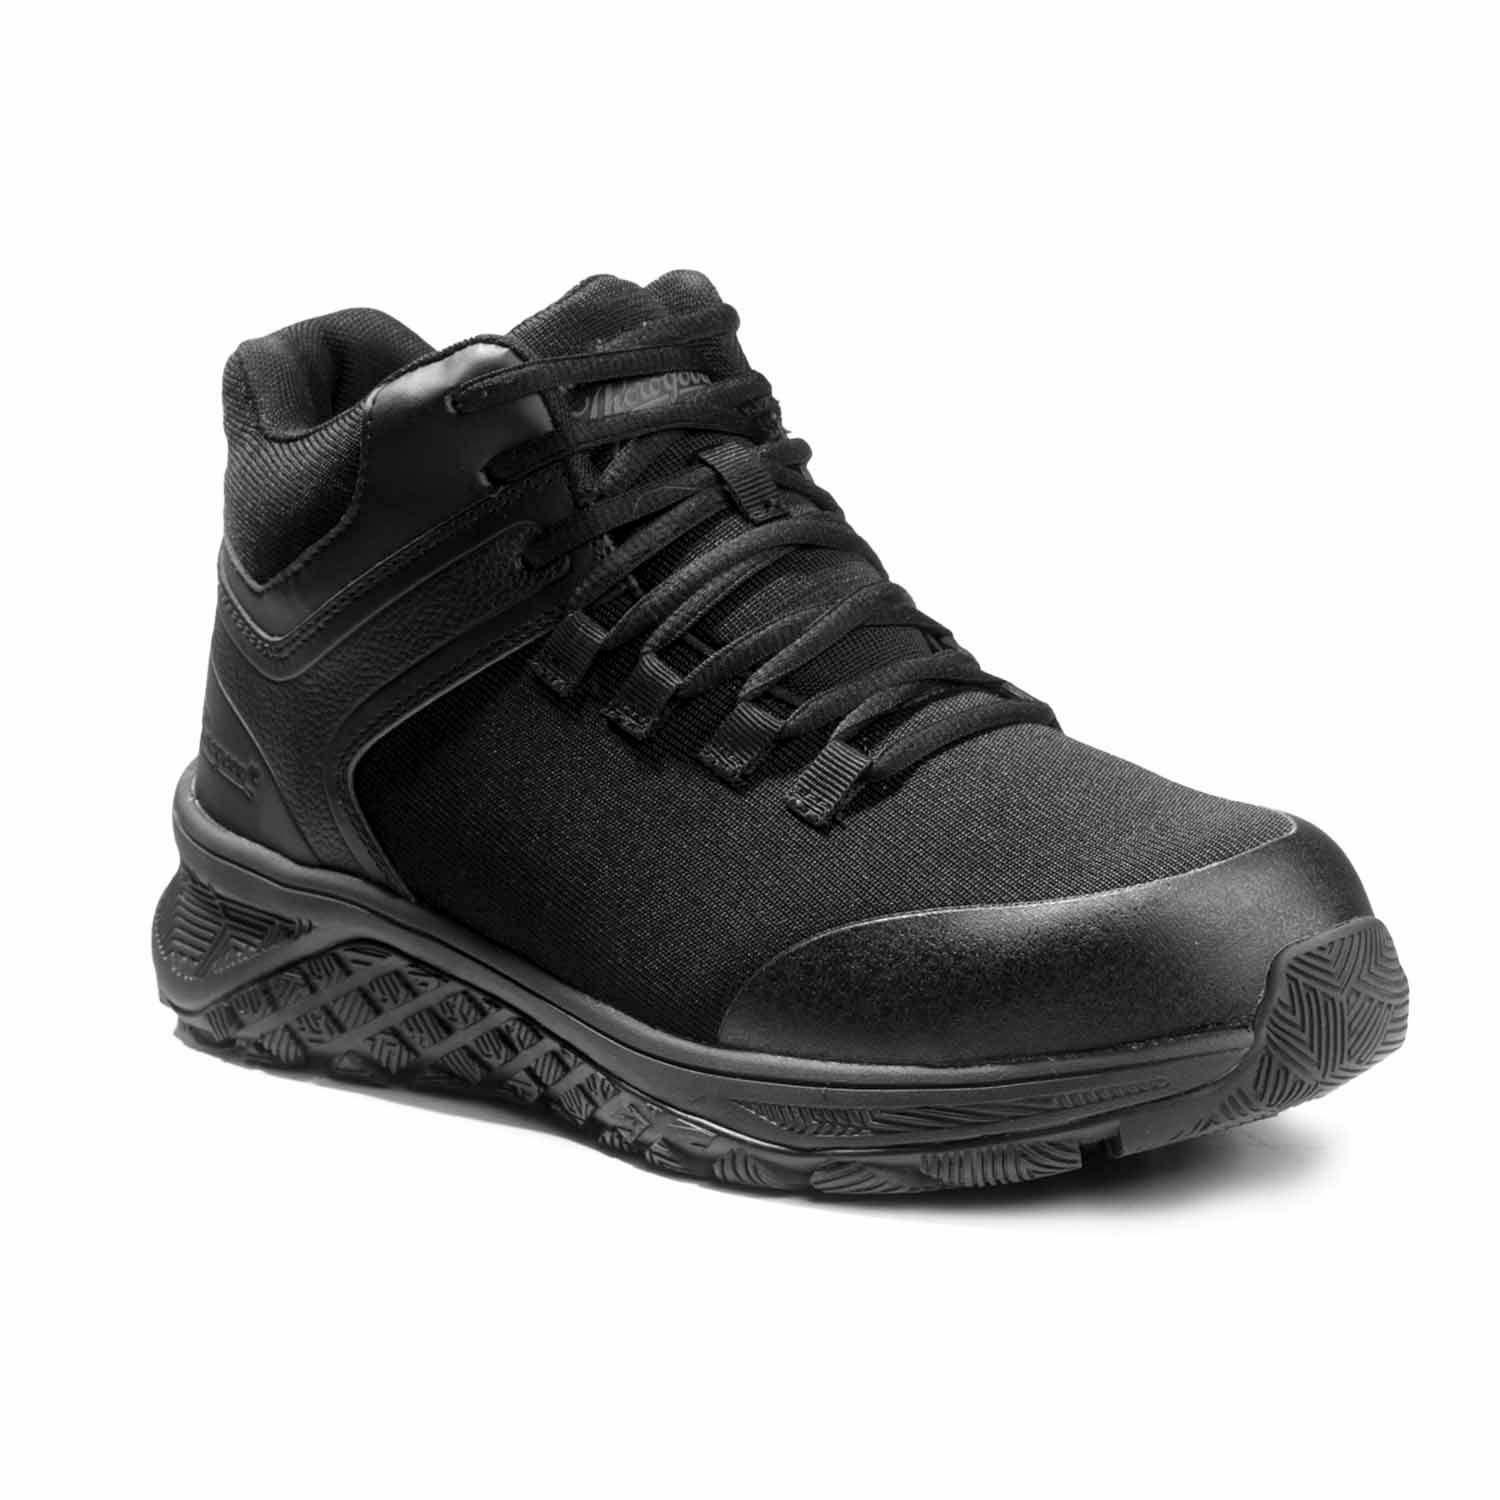 Thorogood T800 Mid Composite Toe Boots